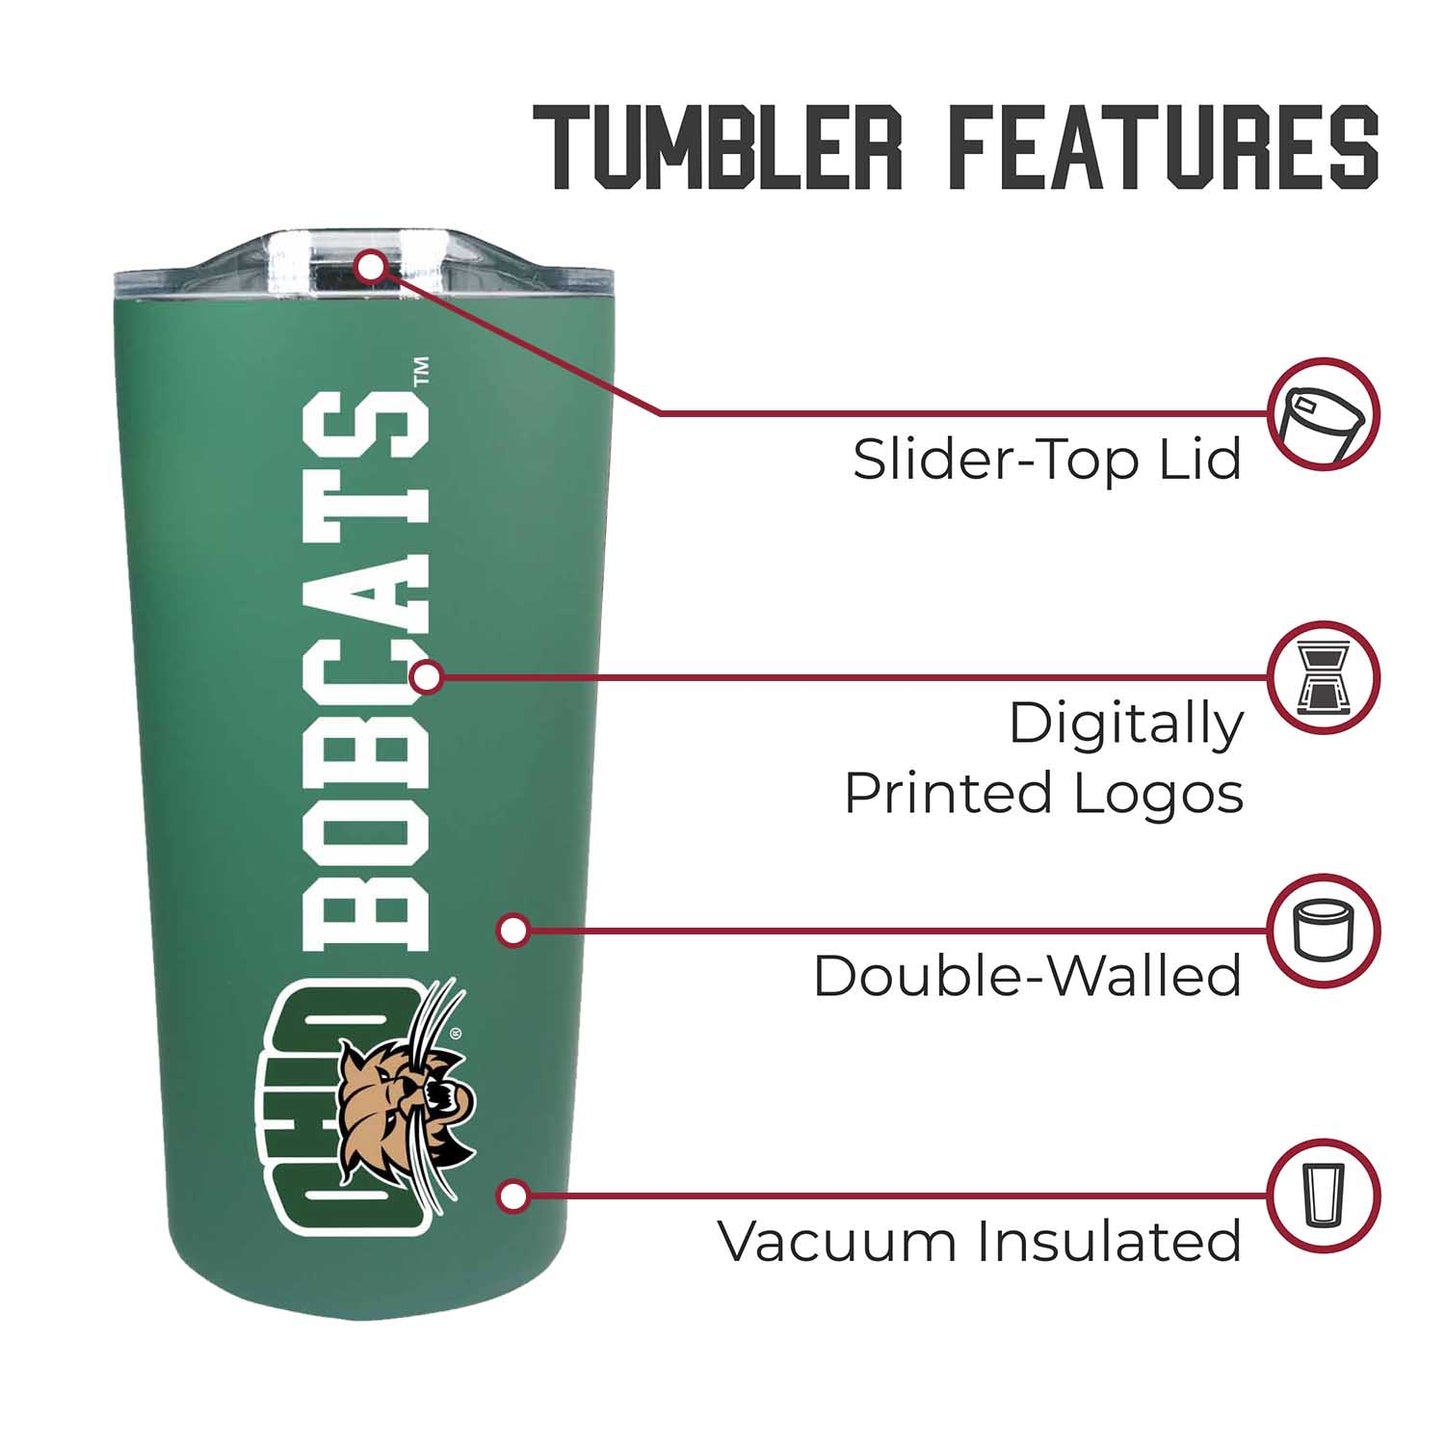 Ohio Bobcats NCAA Stainless Steel Tumbler perfect for Gameday - Green